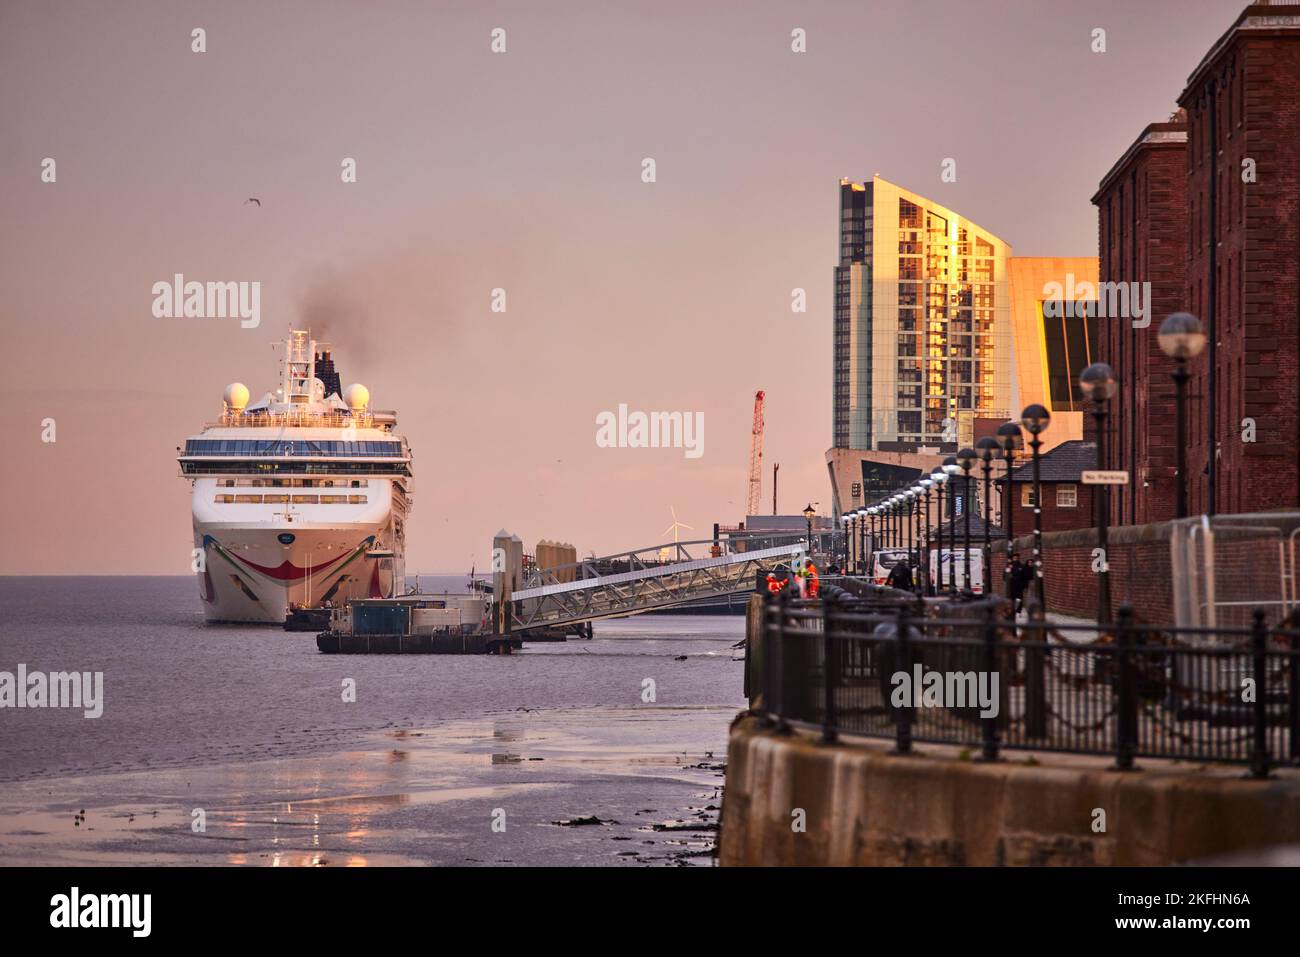 Liverpool cruises ship on the River mersey Stock Photo